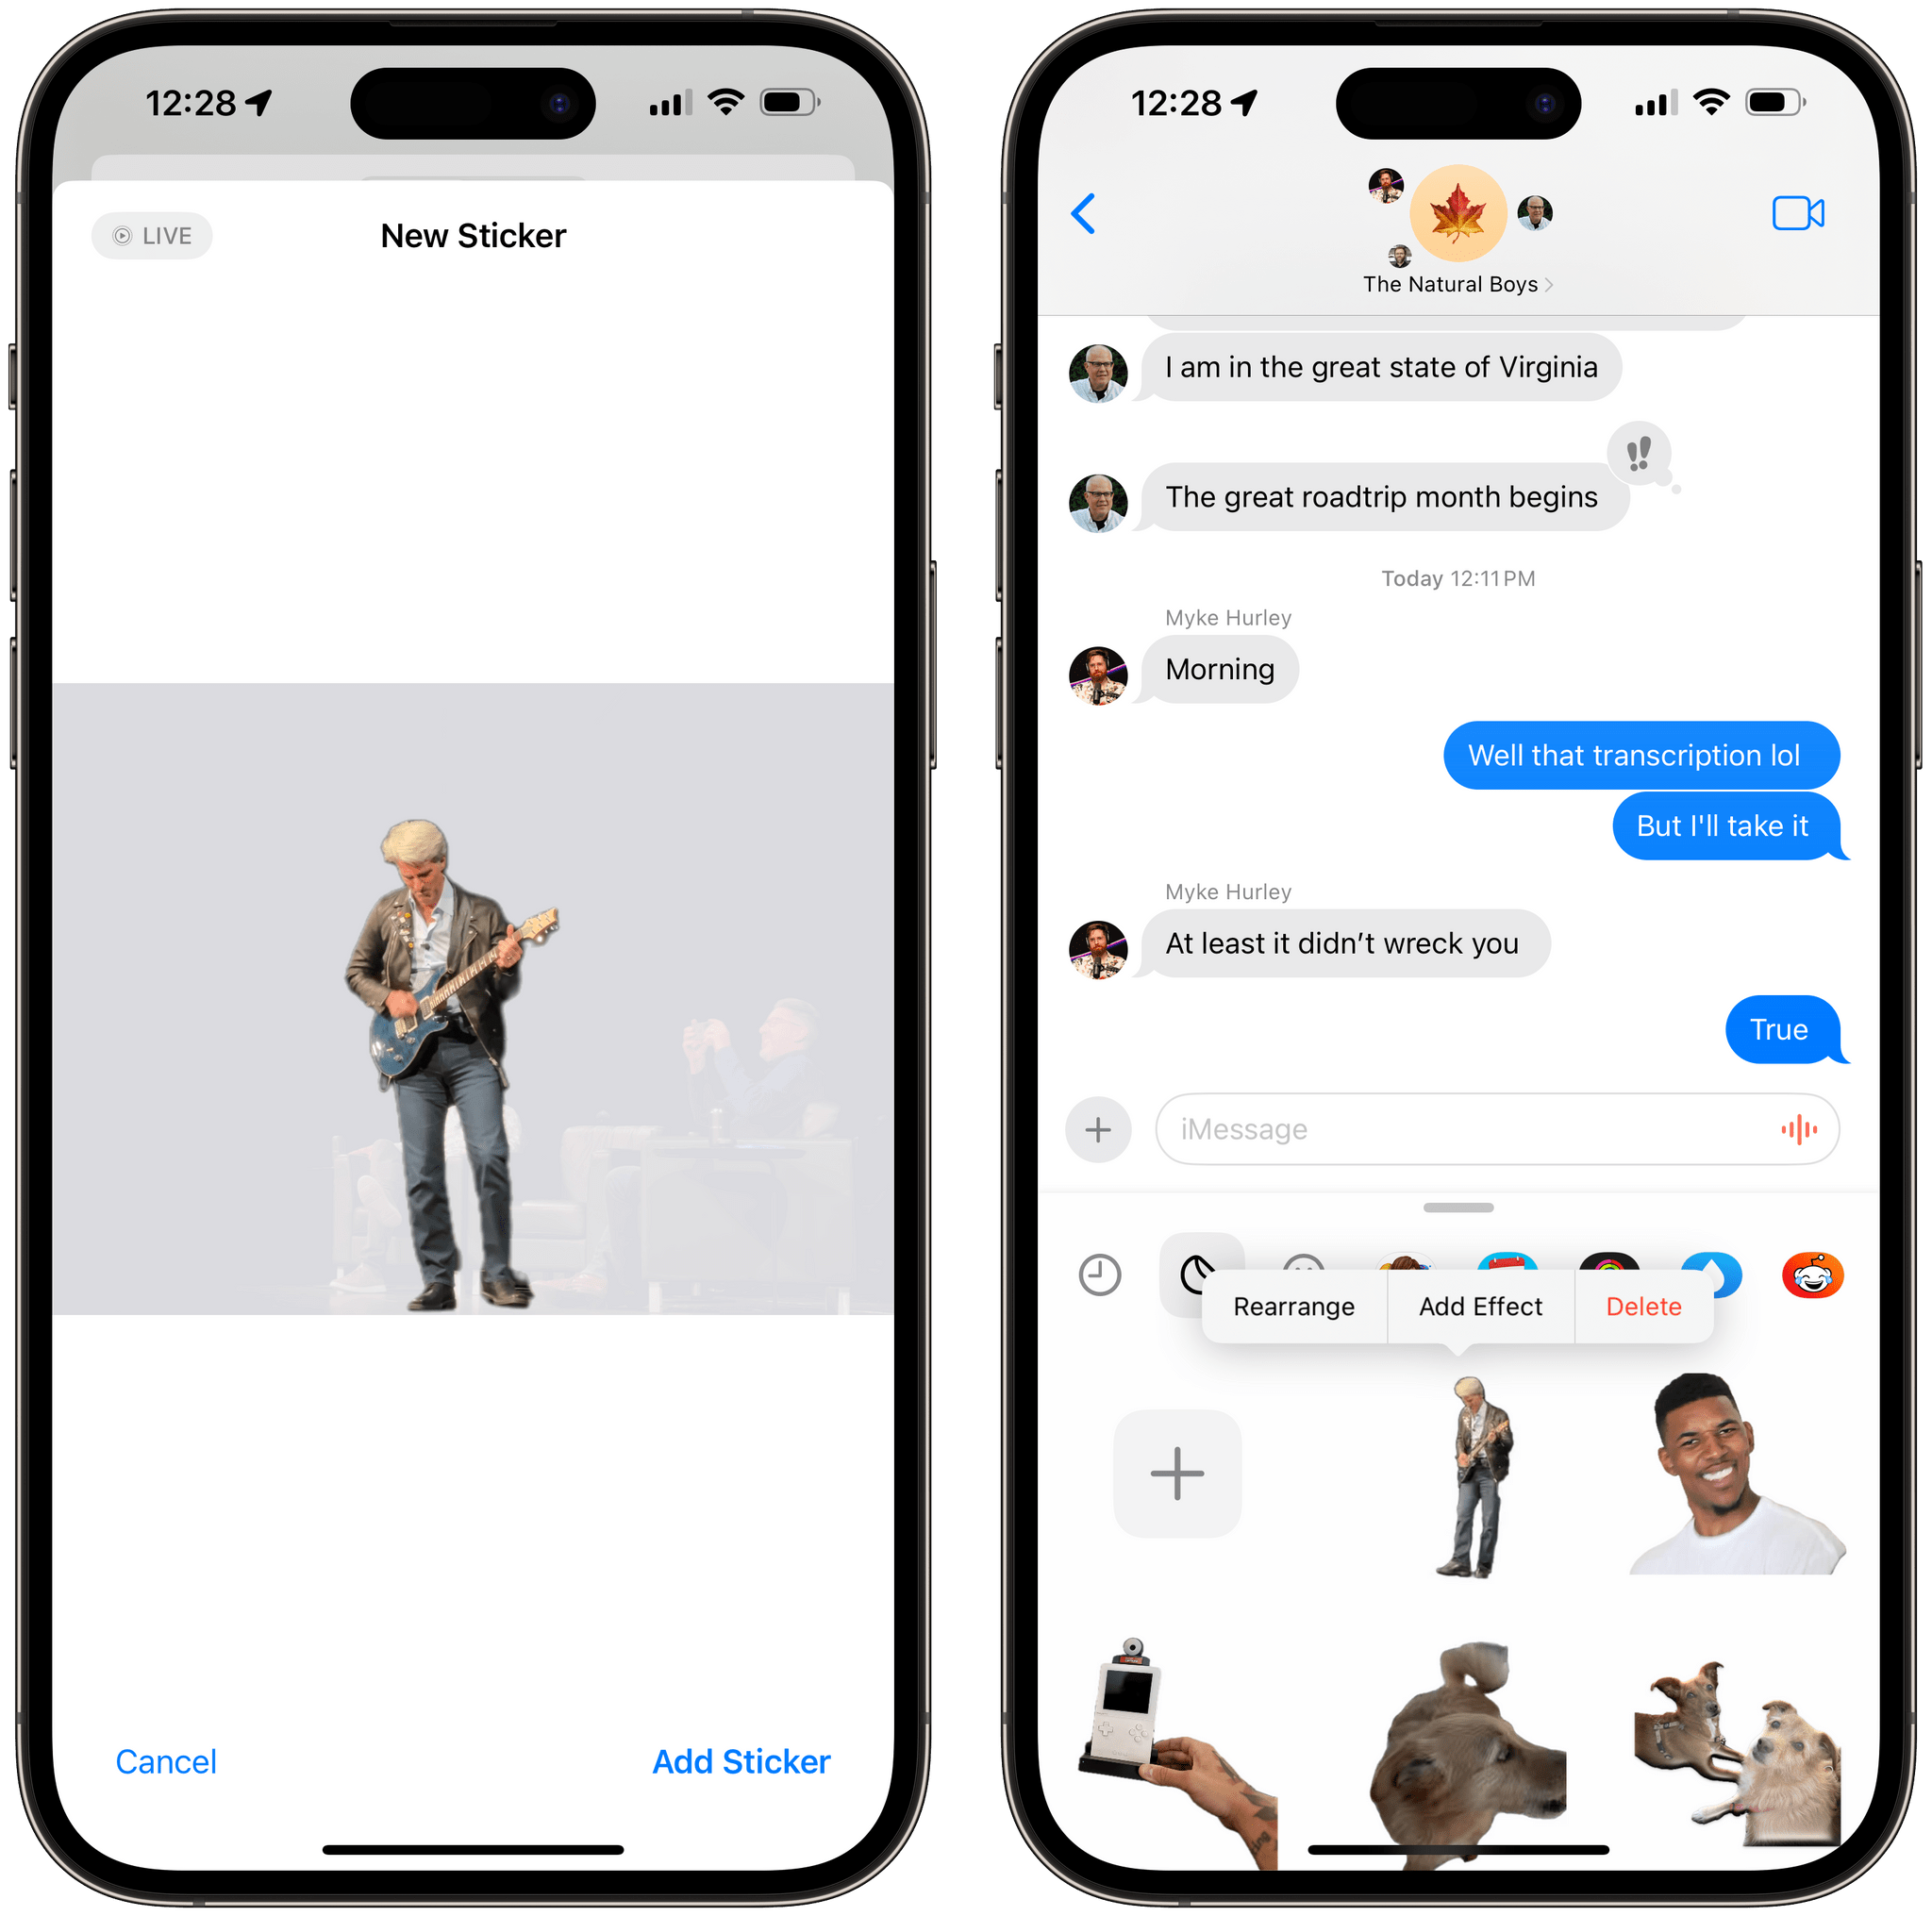 ...and iOS 17 will isolate the subject to turn it into a sticker, ready to be used.